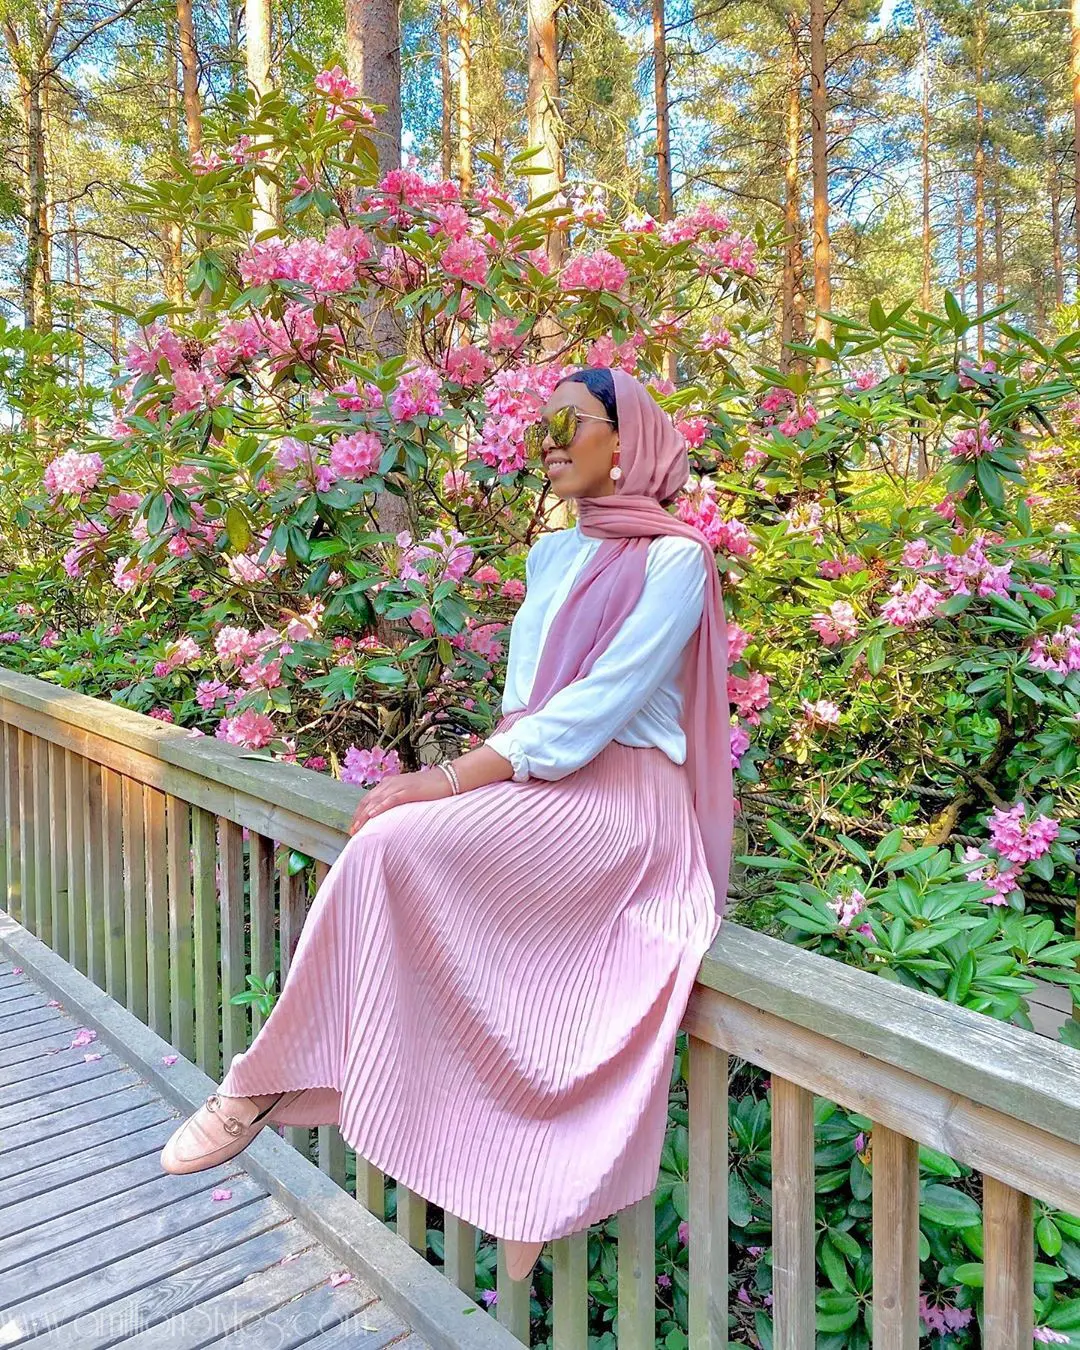 9 Perfect Styles For Muslim Women